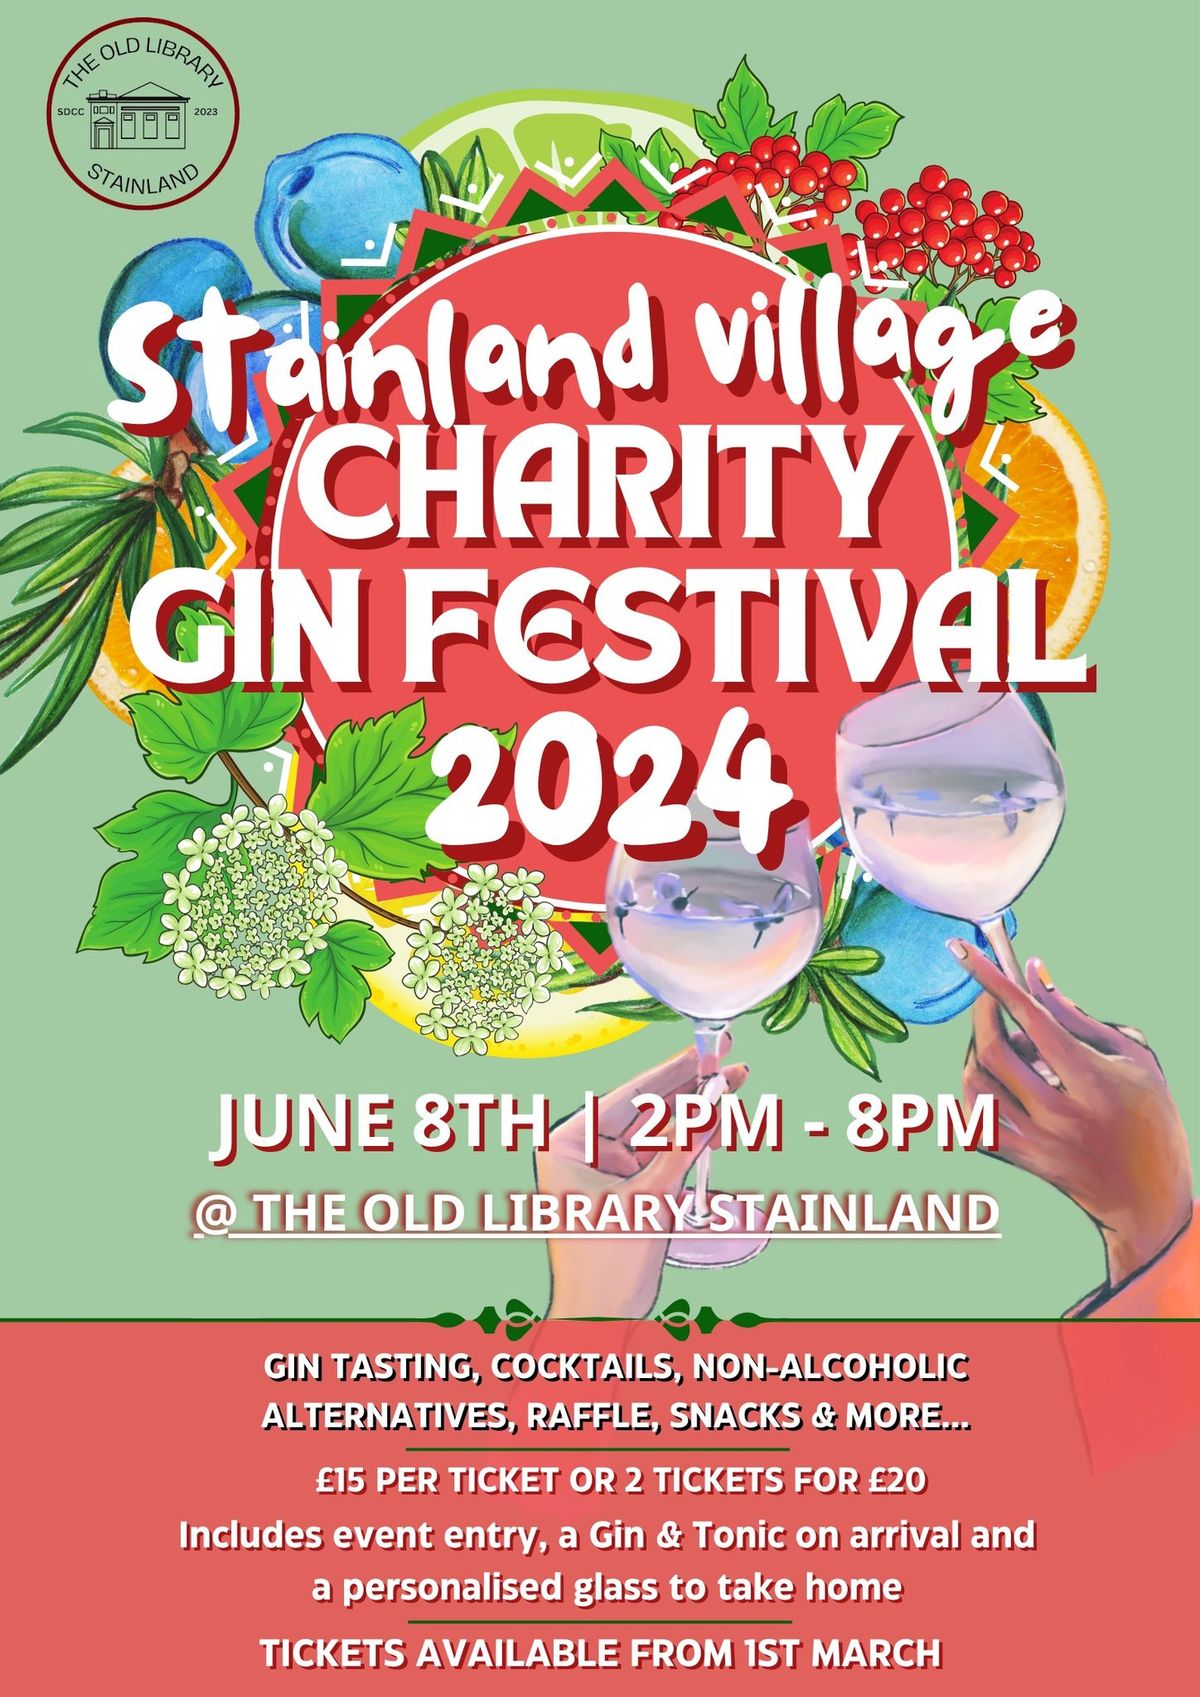 Stainland Village Charity Gin Festival